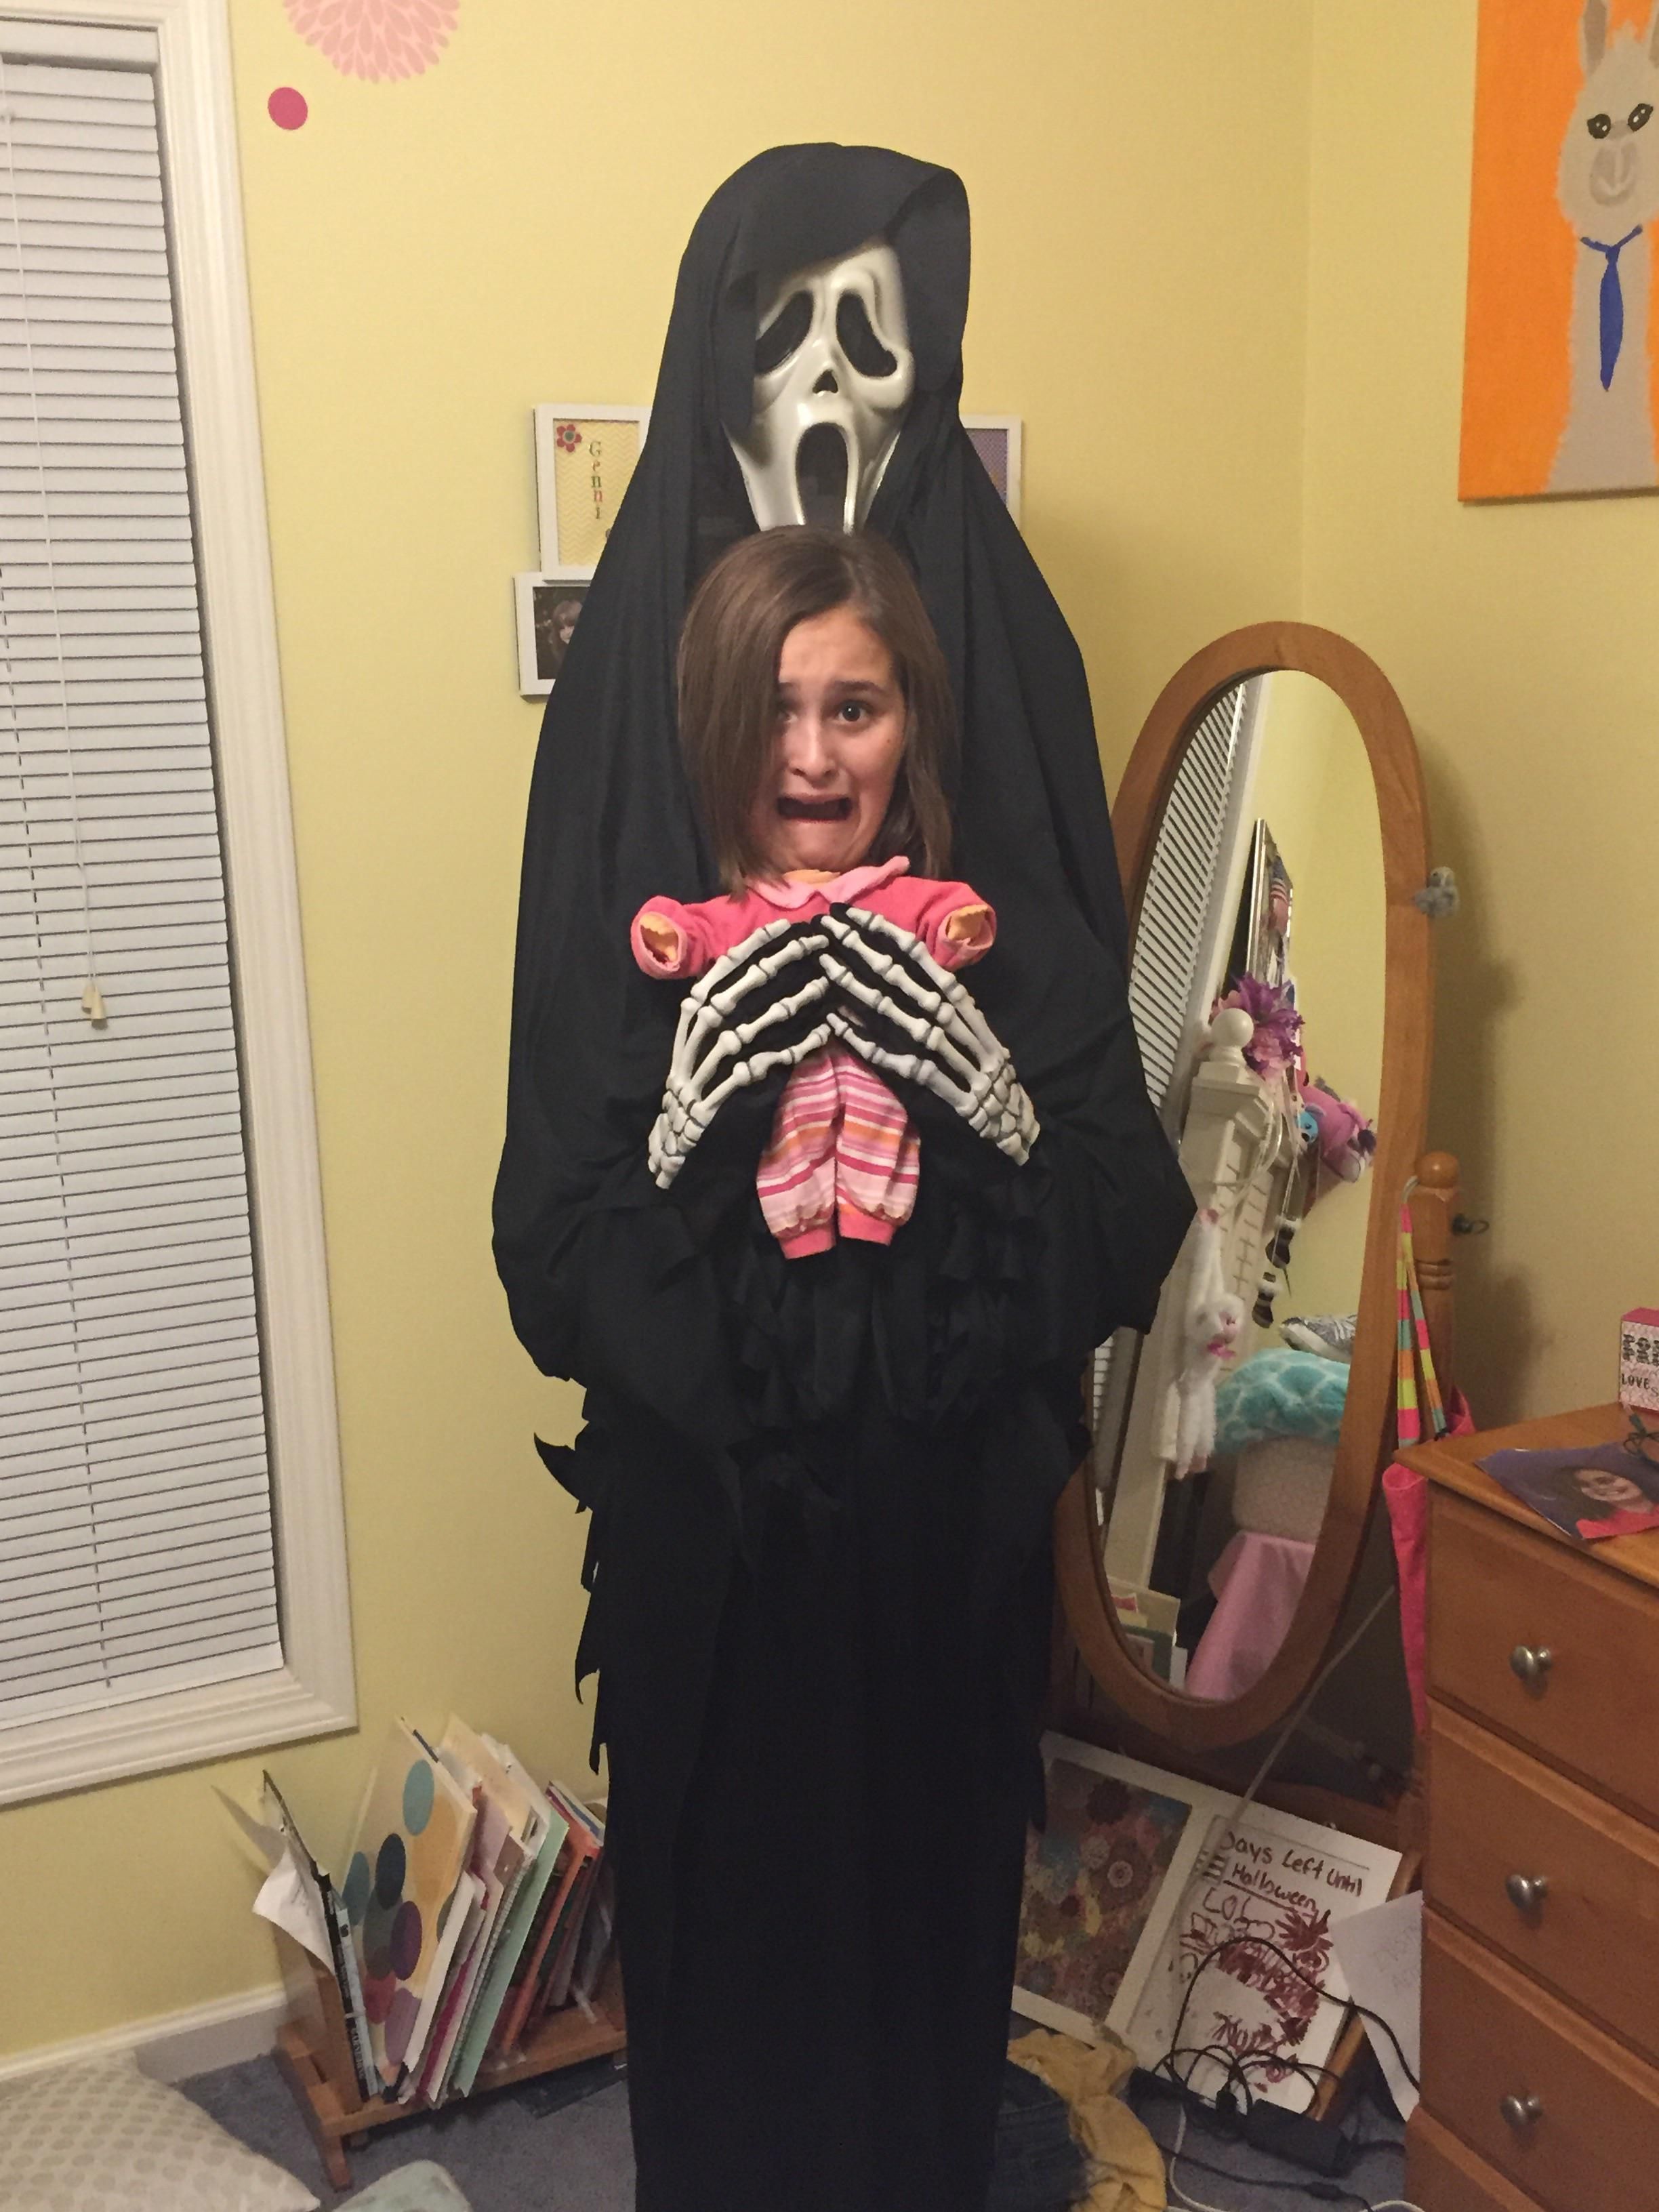 My friends D.I.Y costume